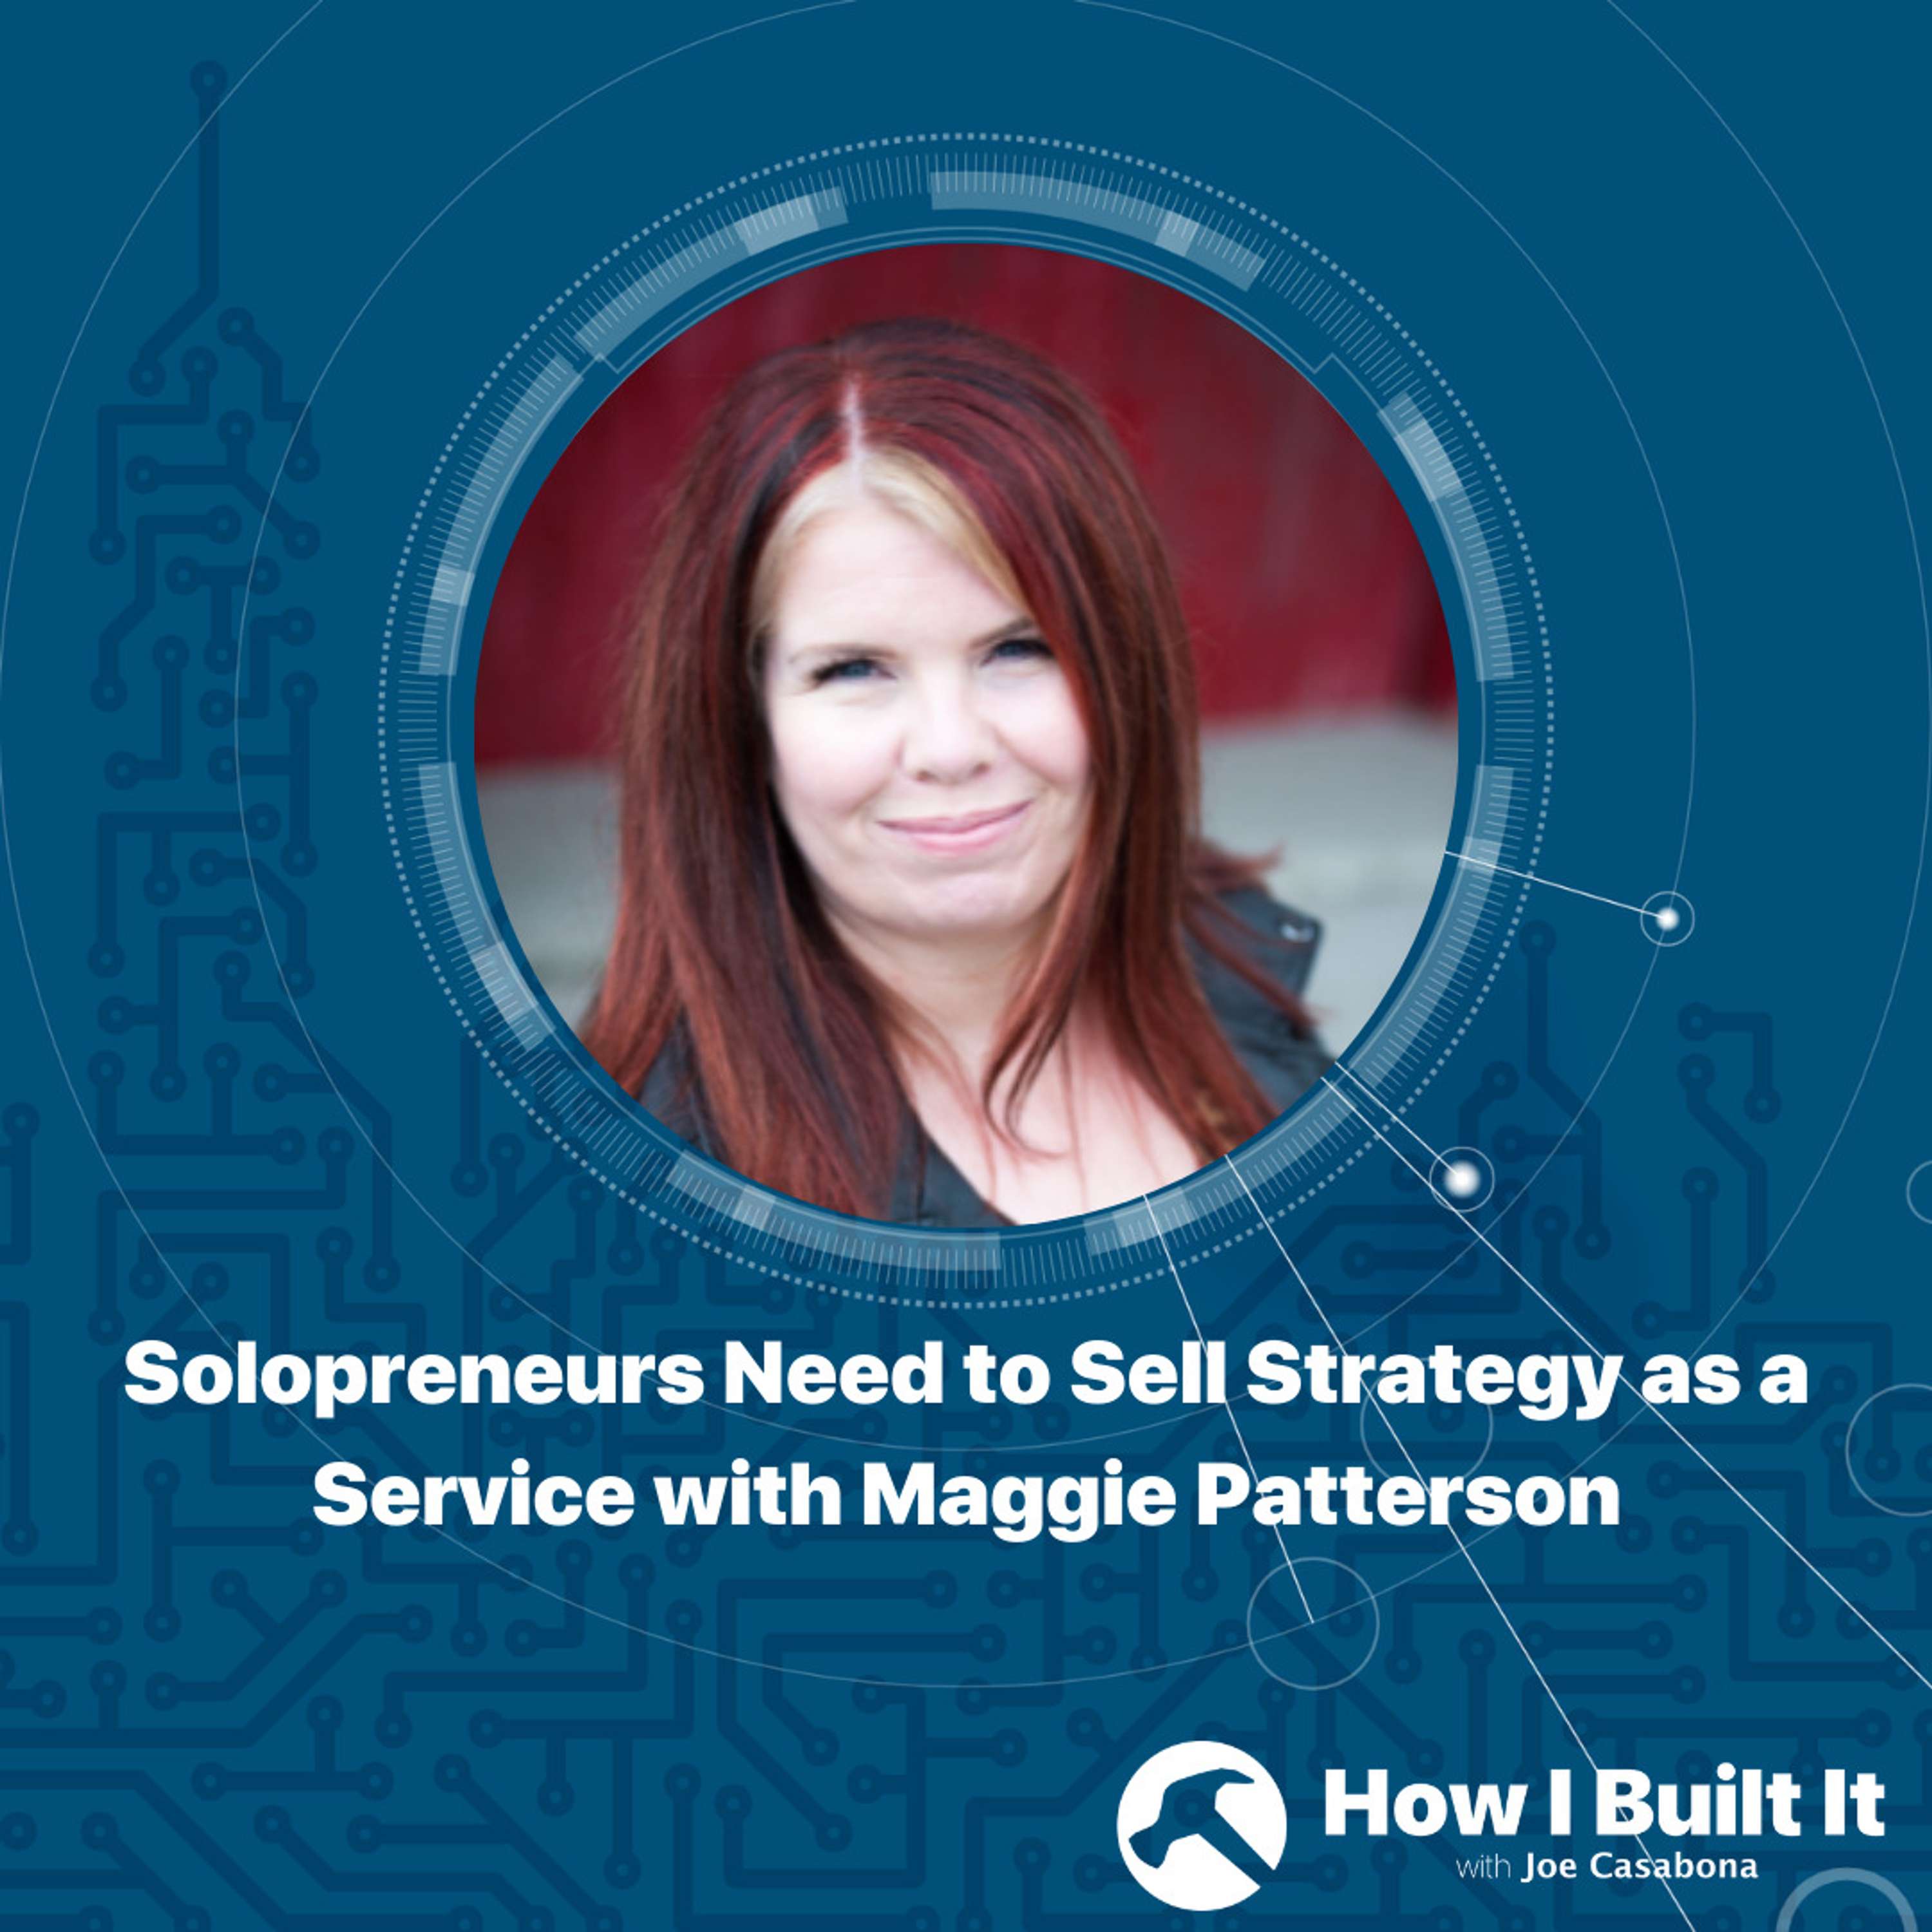 Solopreneurs Need to Sell Strategy as a Service with Maggie Patterson